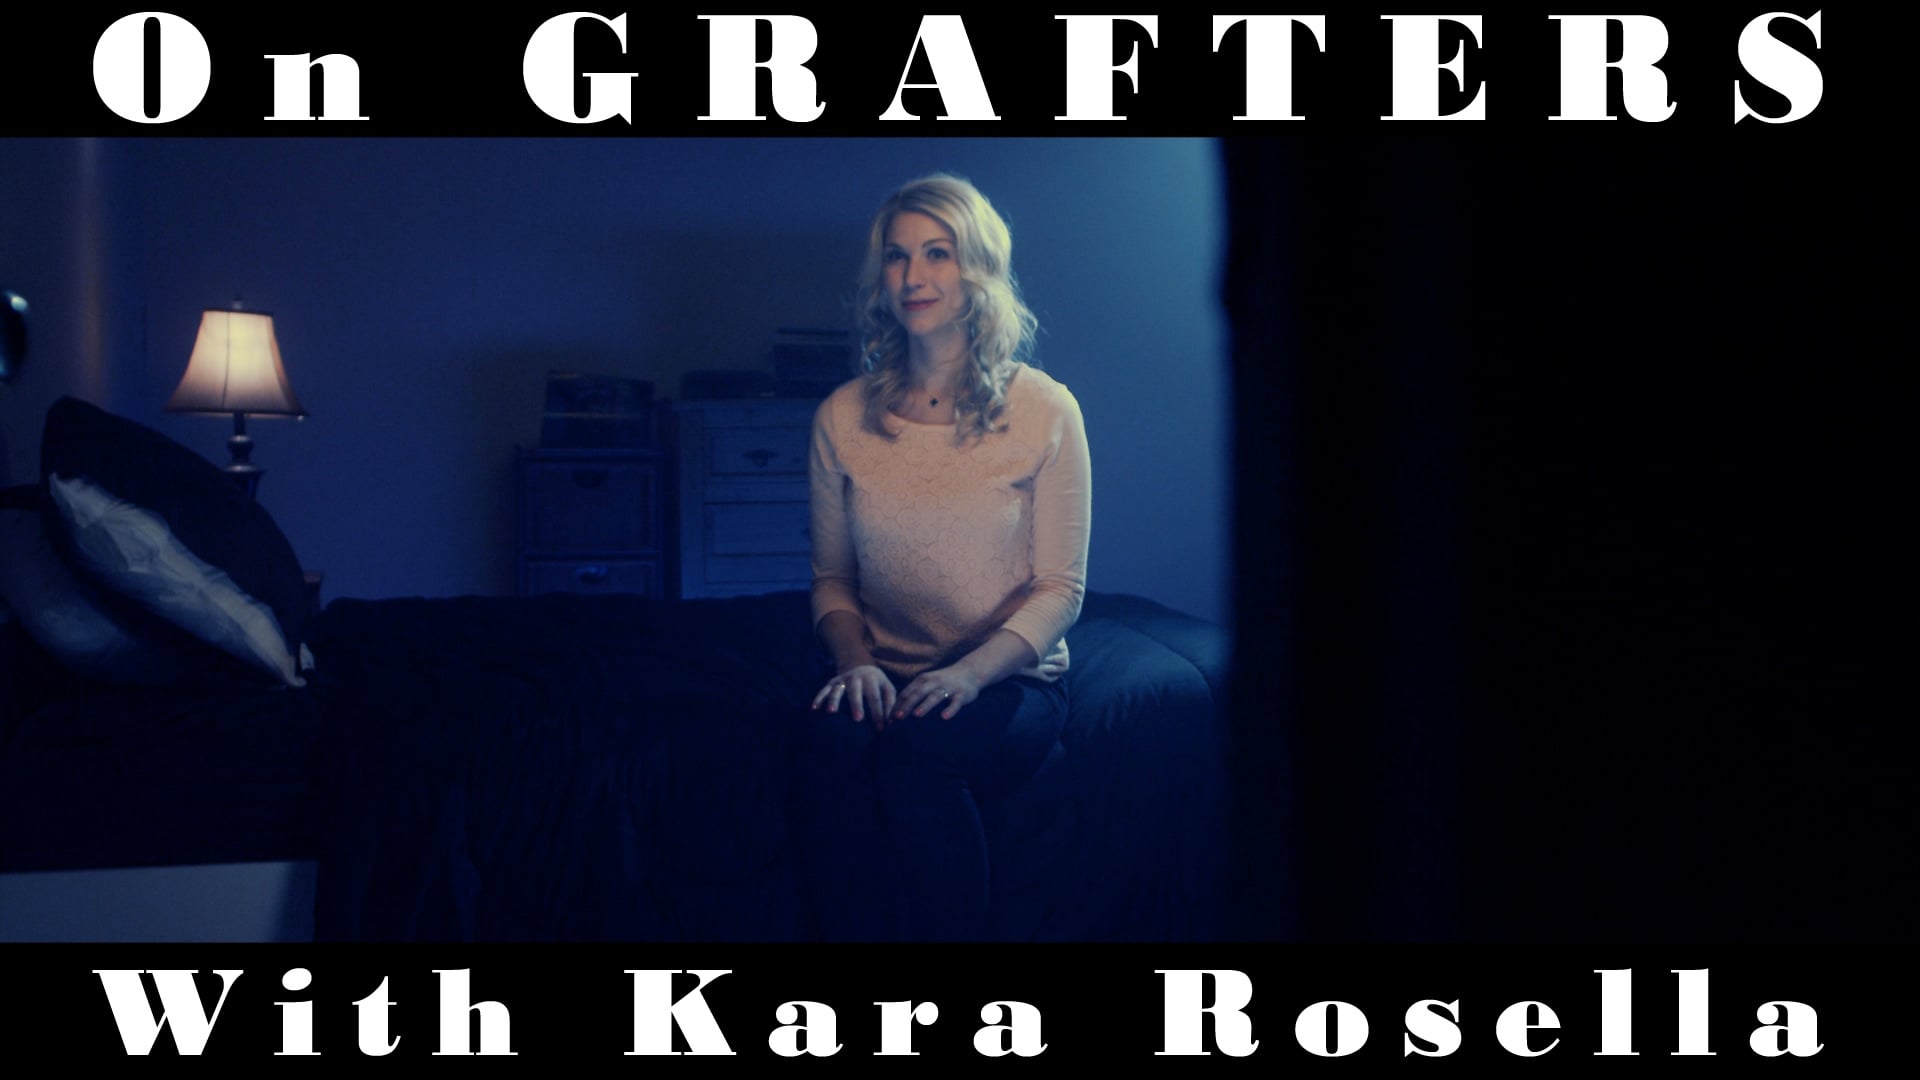 On GRAFTERS, with Kara Rosella